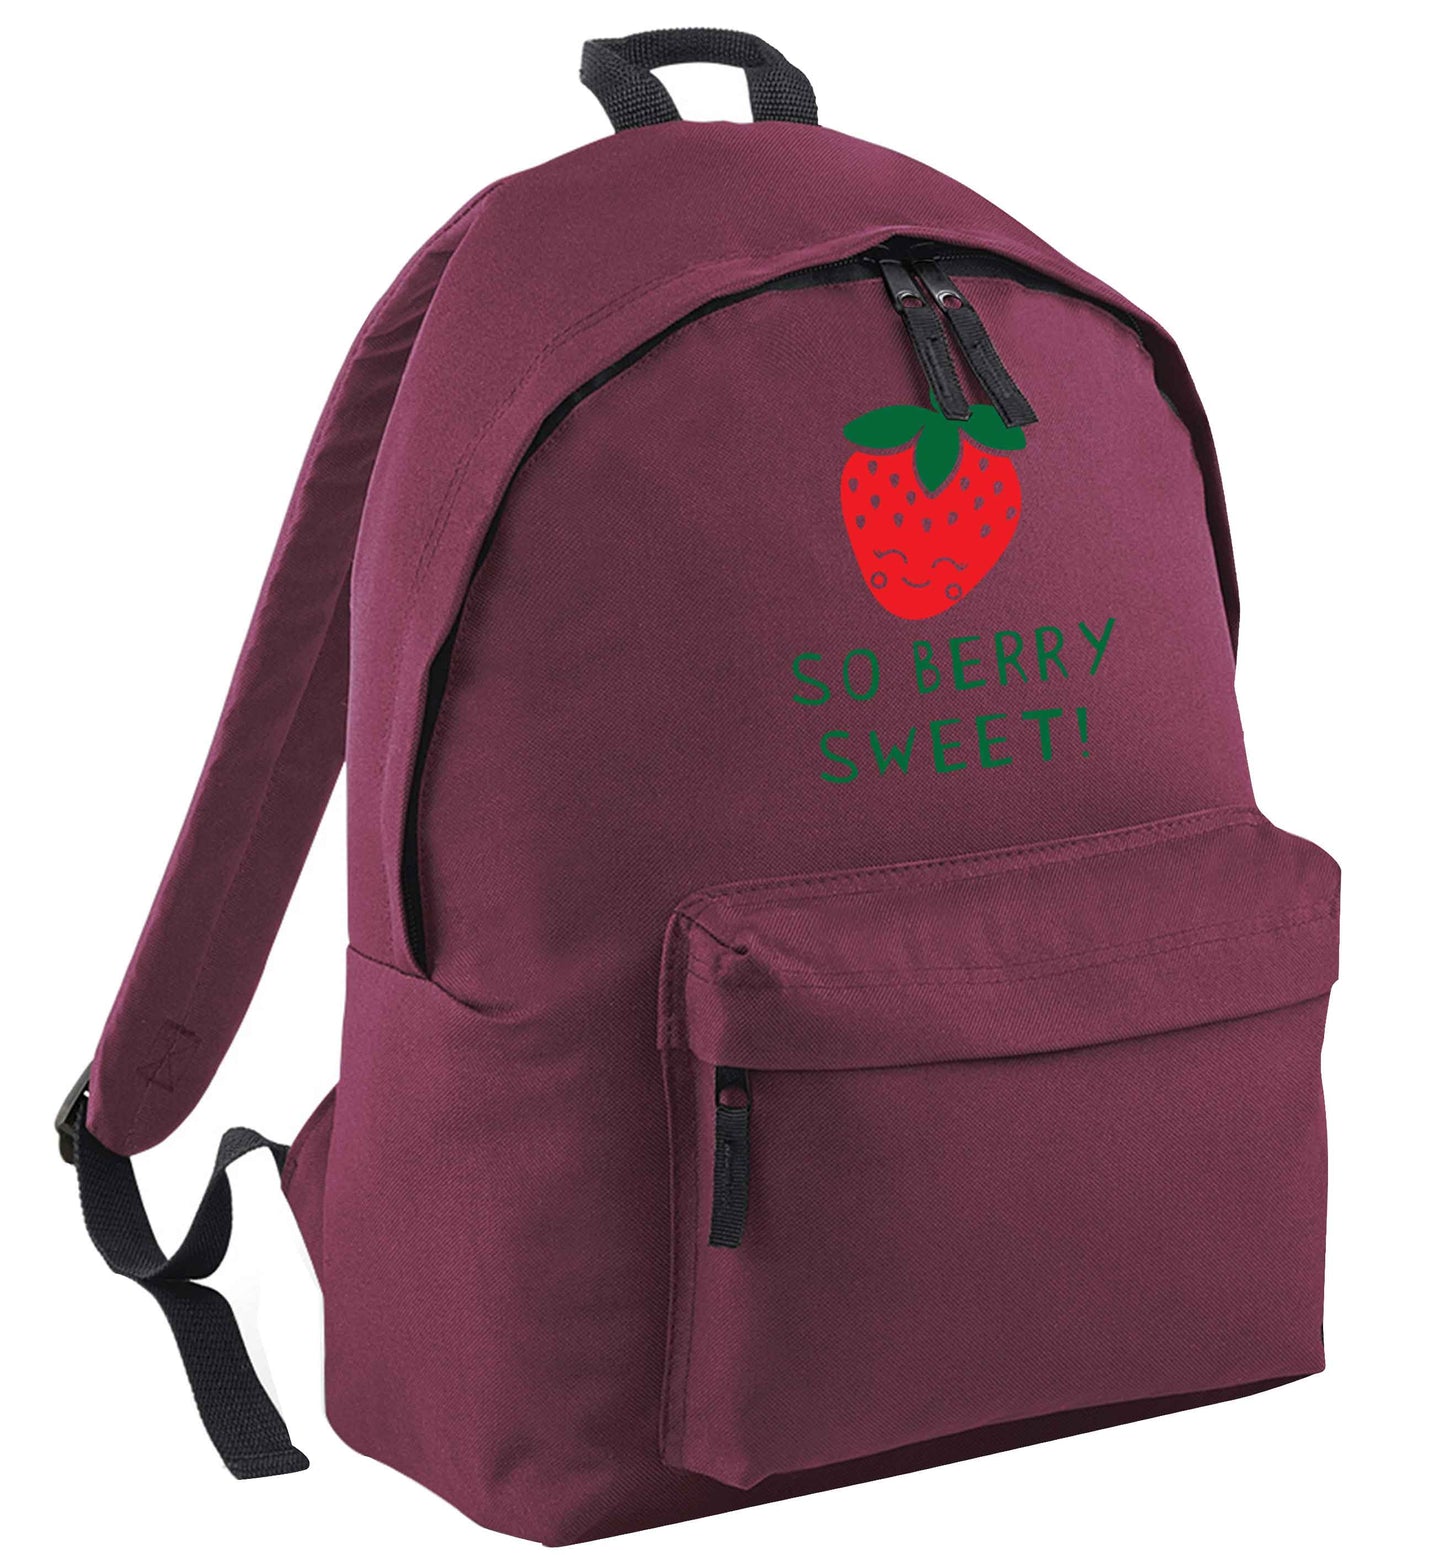 So berry sweet maroon adults backpack